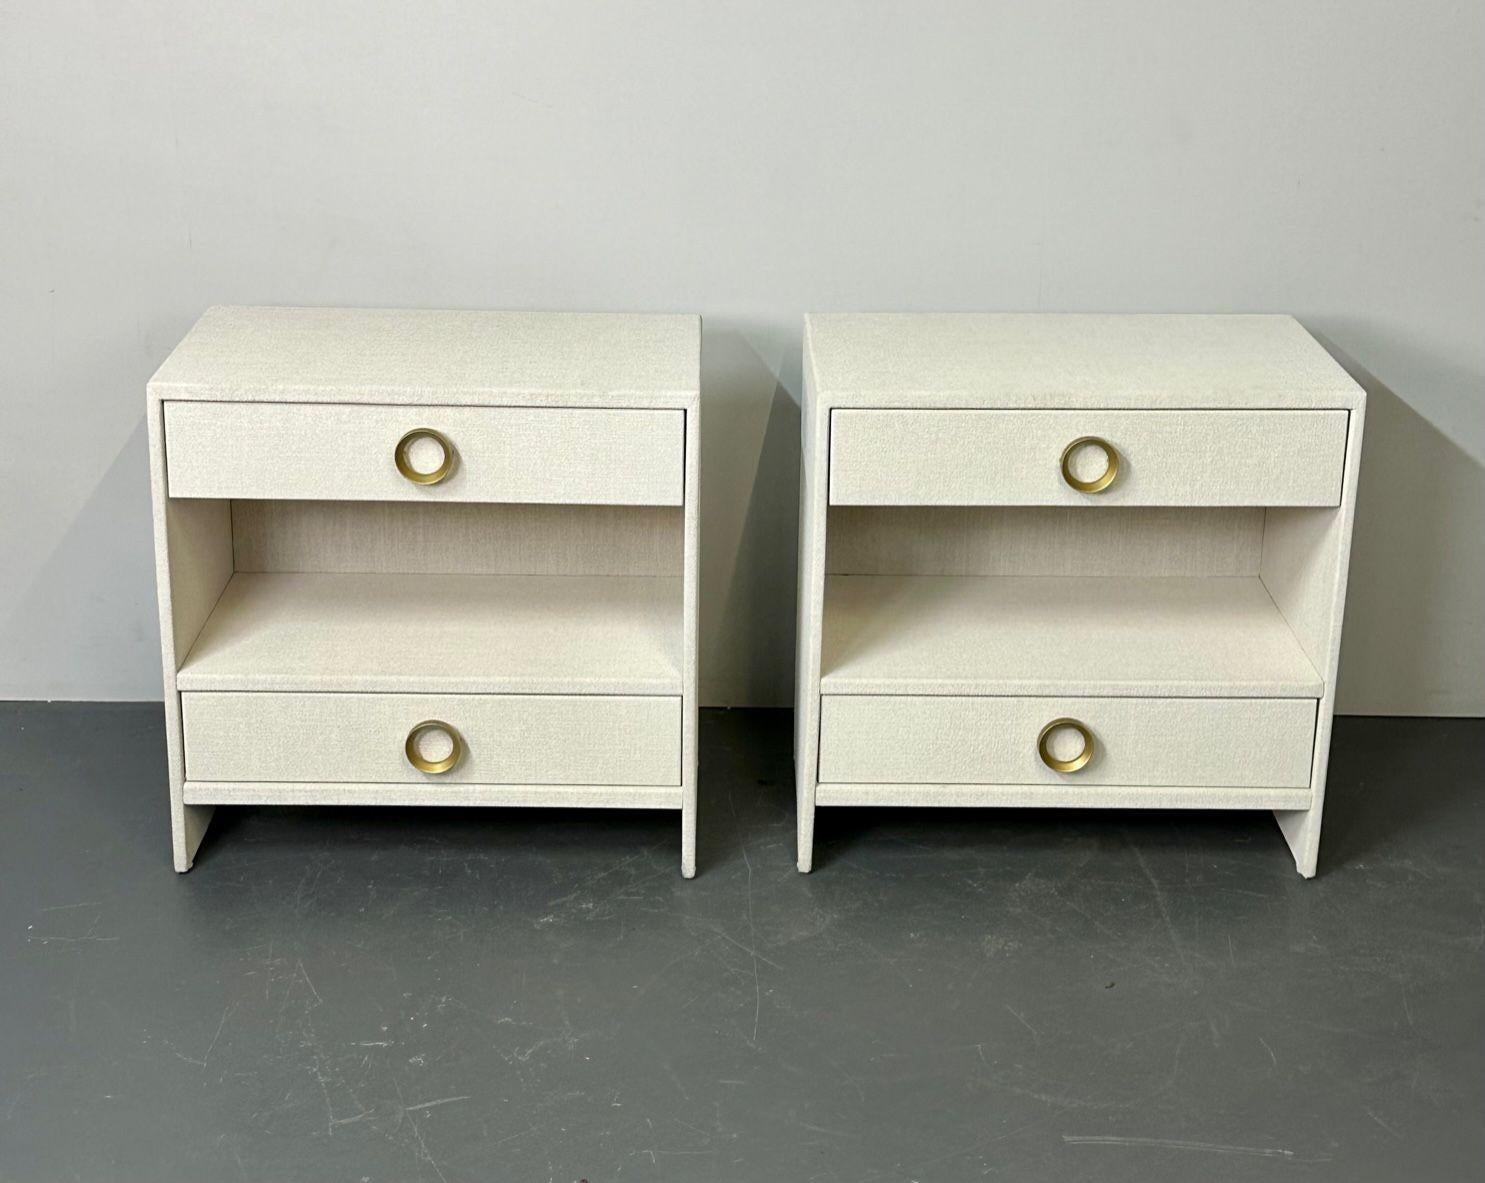 Pair Custom Linen Wrapped Open Commodes, Chests, Nightstands, White, American
 
Pair of modern linen chests, nightstands, or dressers. Custom quality two drawer open modern decorative cabinets. Each having been hand wrapped in linen and given a